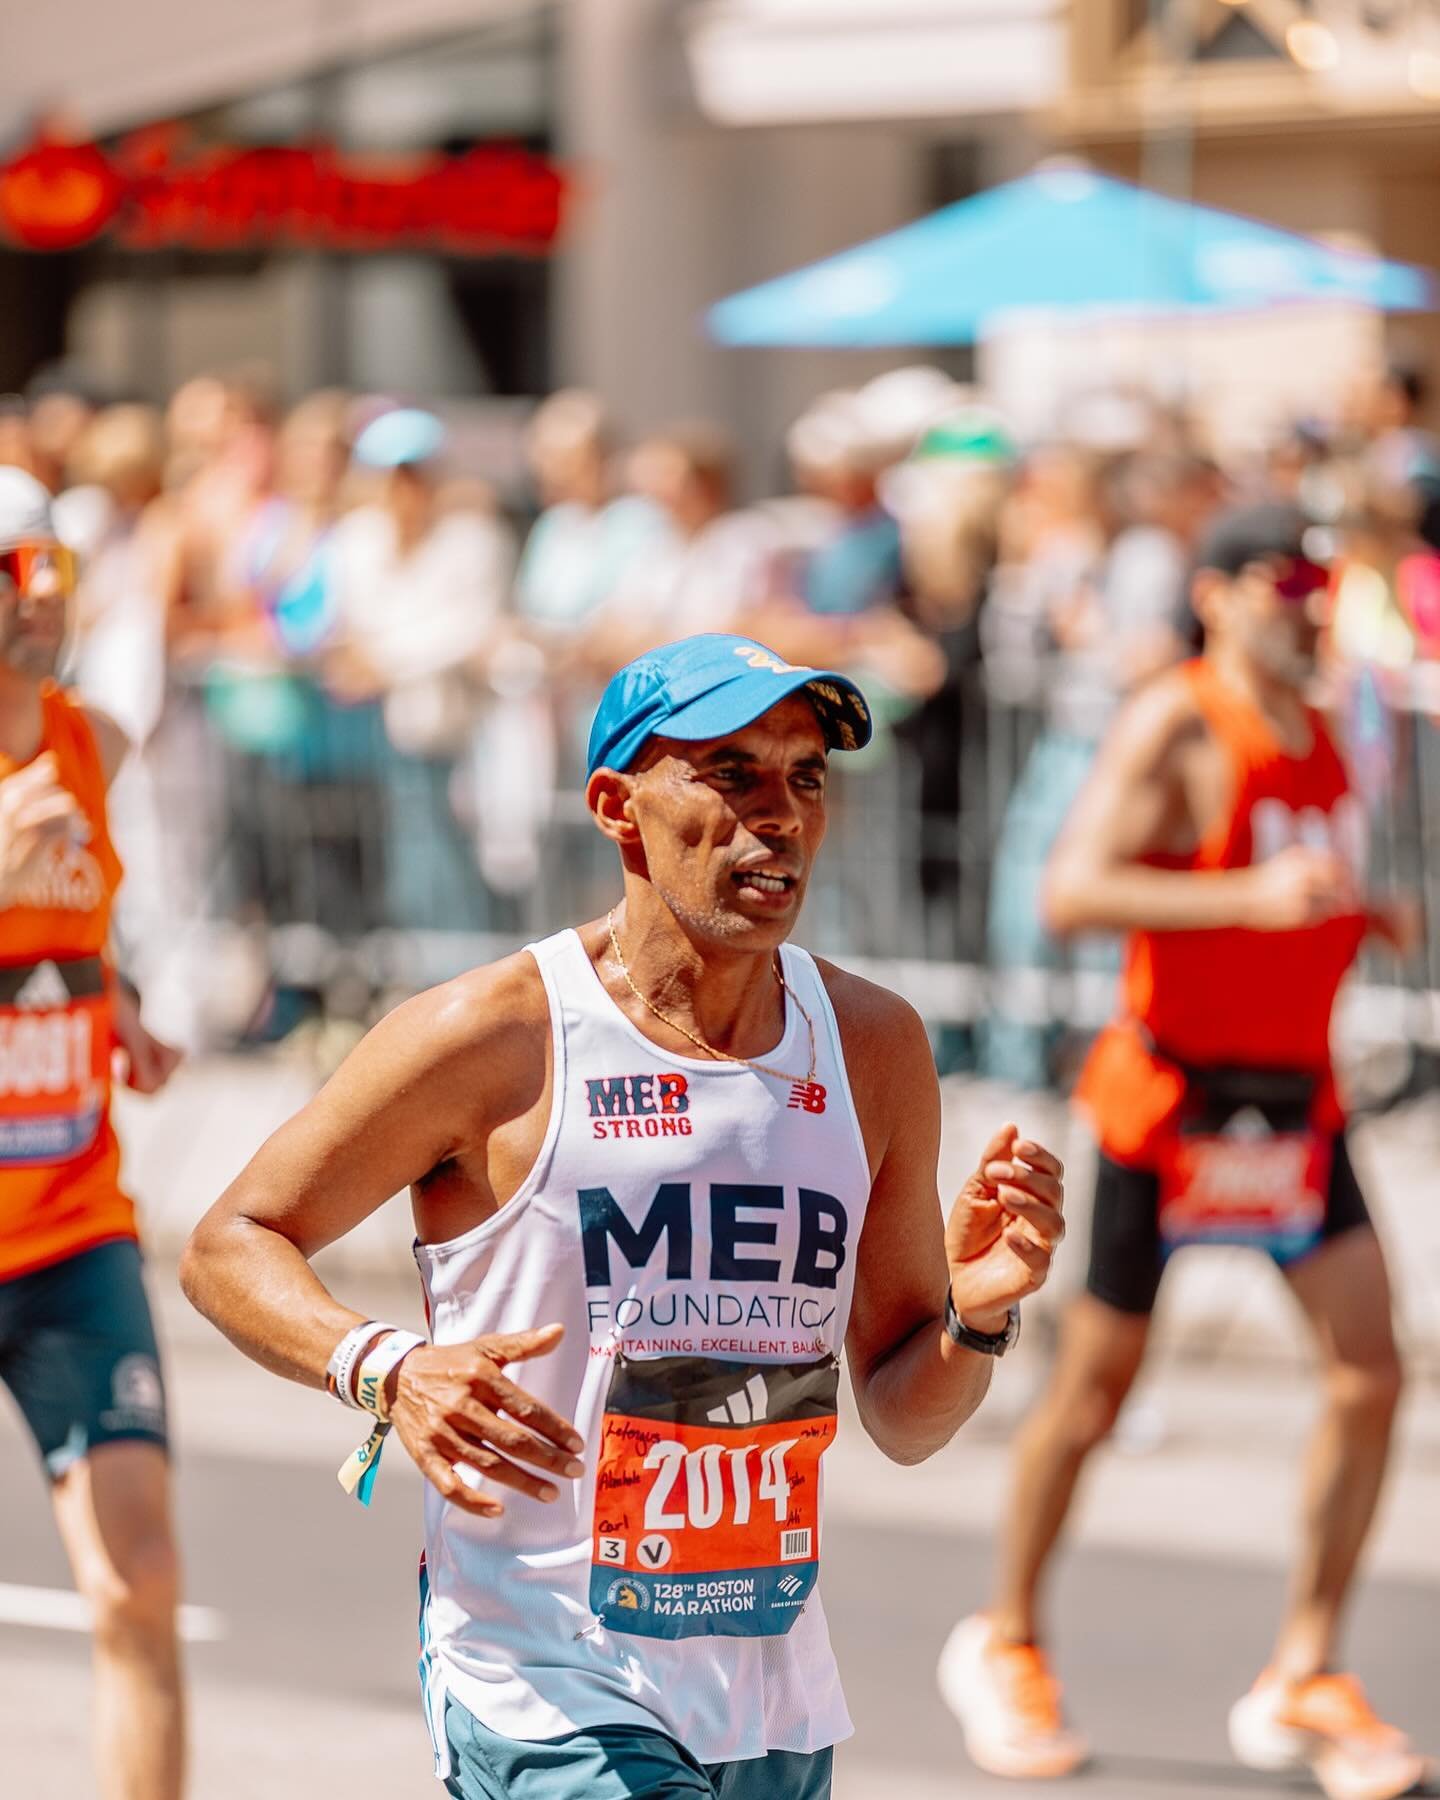 The celebration of my victory in Boston was incredible and I am grateful for everyone&rsquo;s support.

My initial goal to run for the MEB Foundation was to do it on my 10th Anniversary and finish an hour slower than when I won (3:08:37 - 10 years an